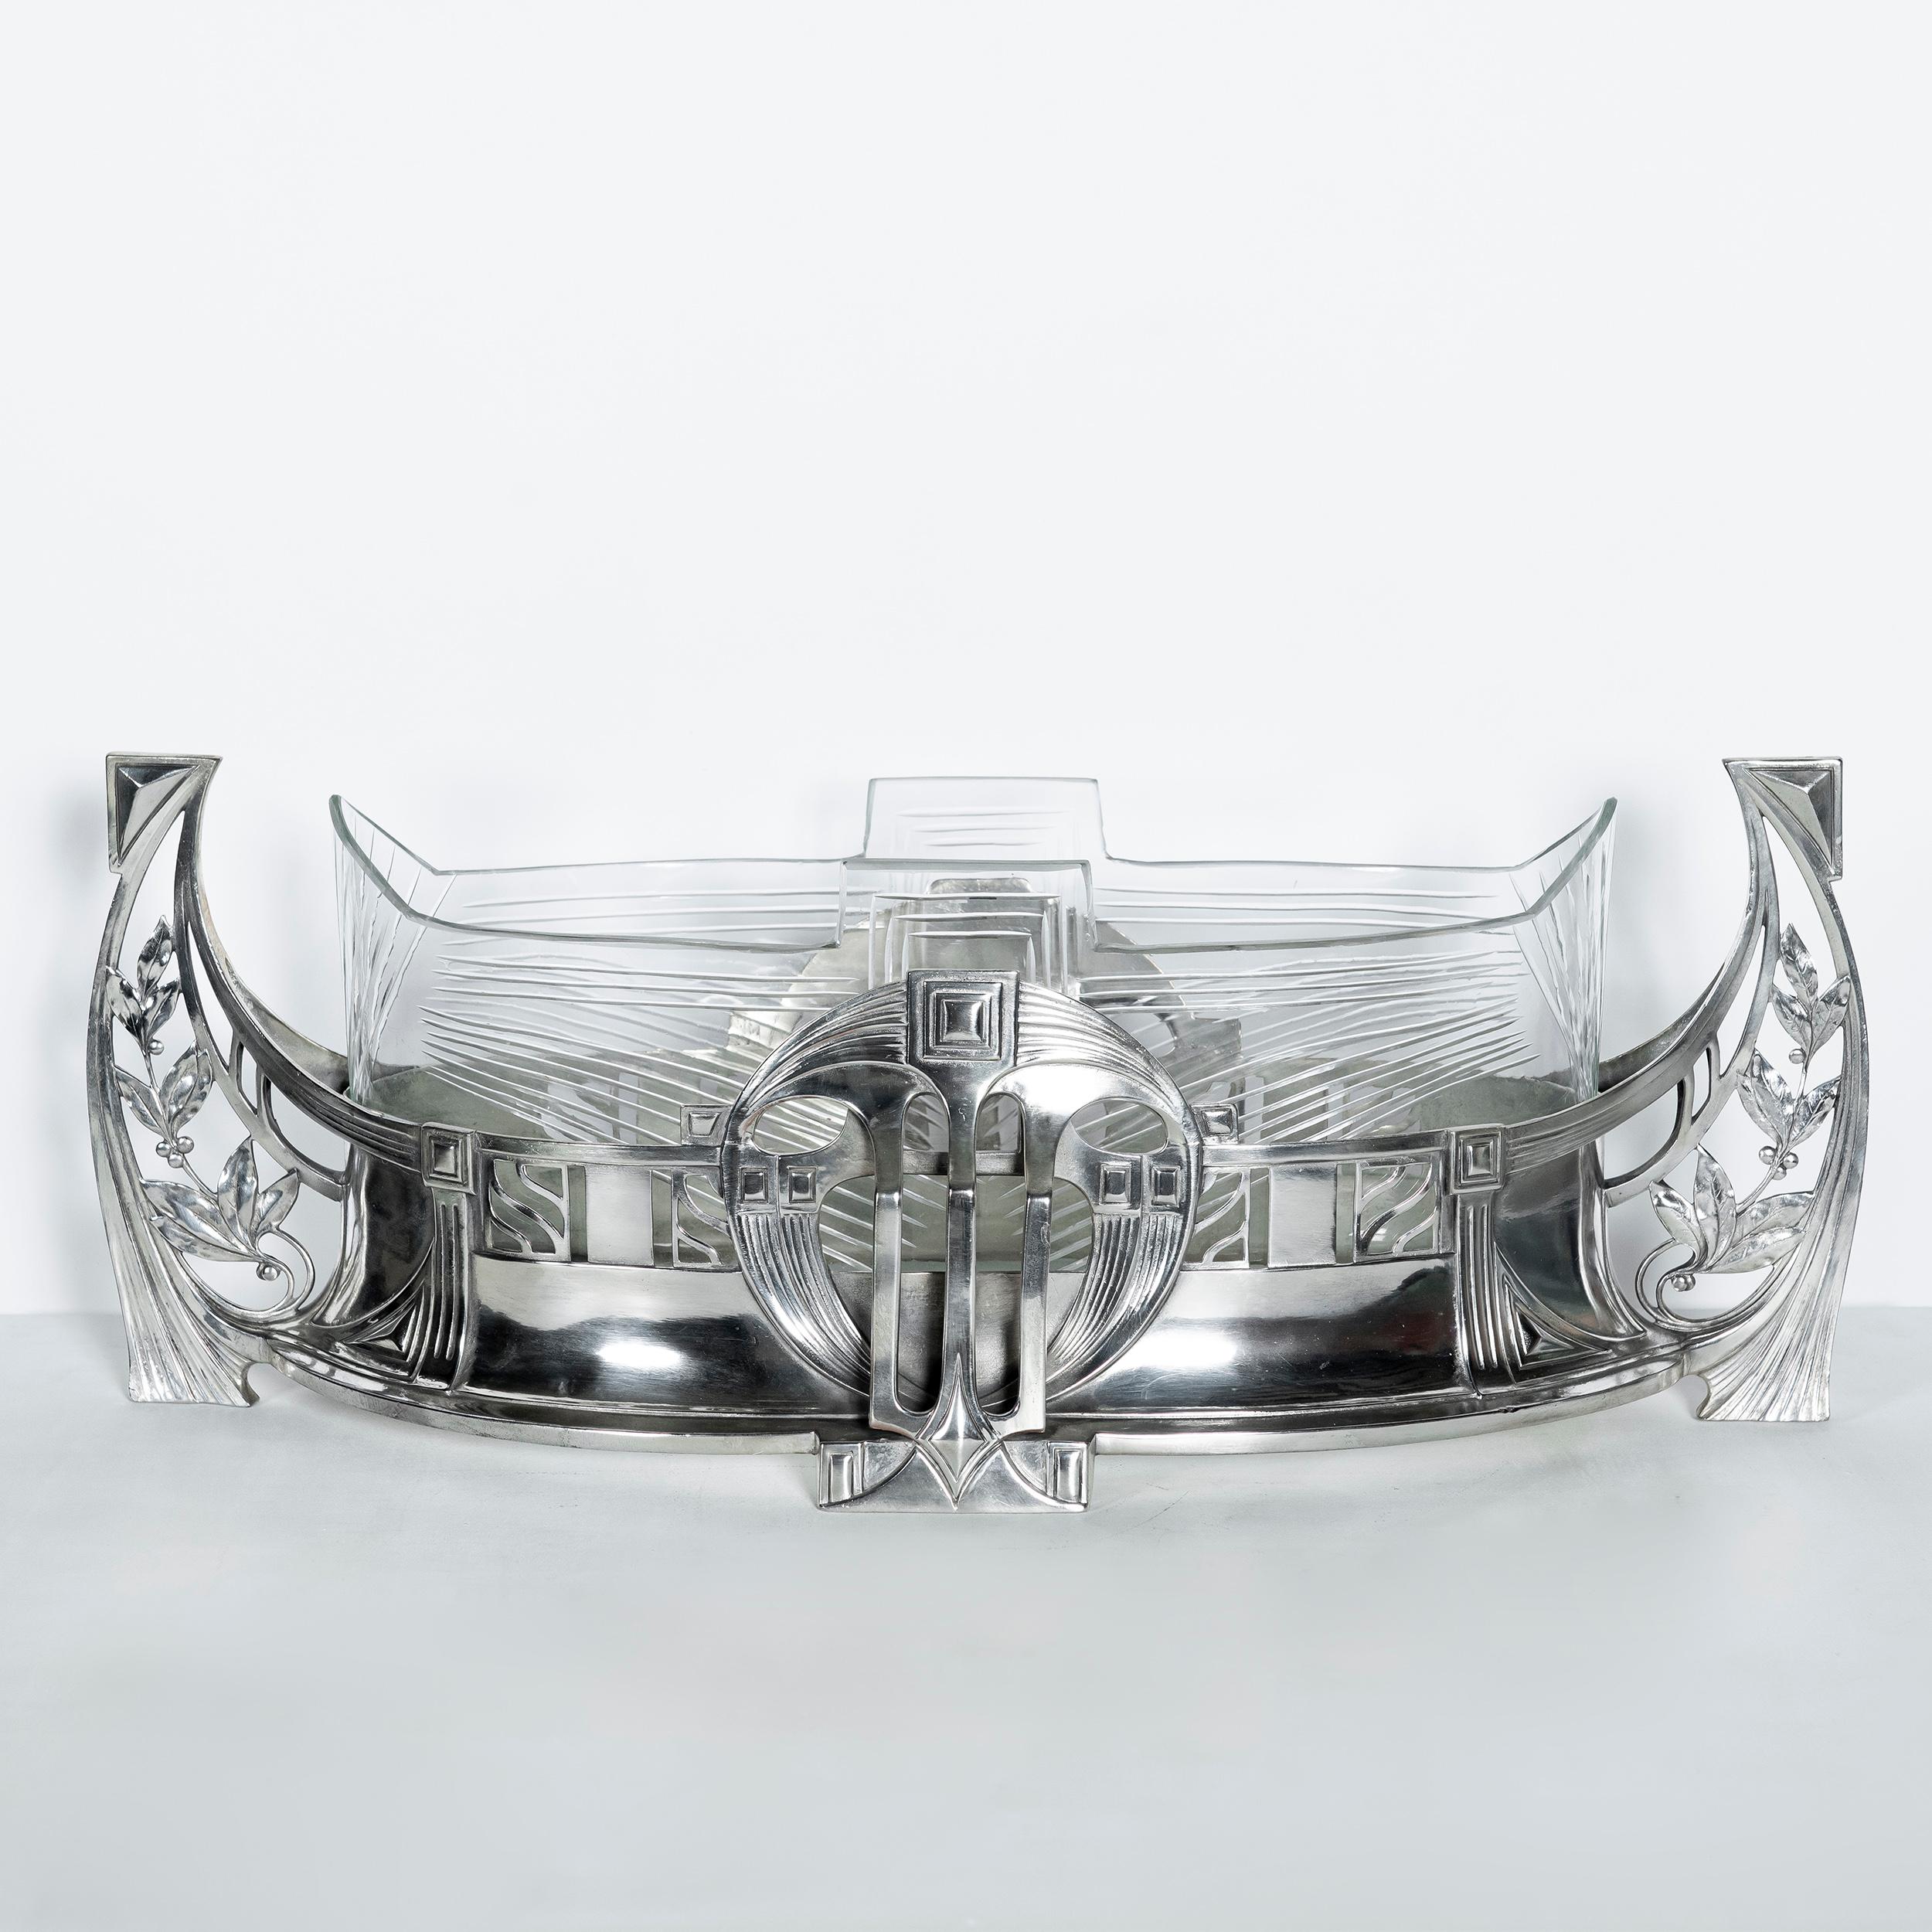 Pair of W.M.F. silver plate jardinière with glass, Jugendstil period, circa 1900.